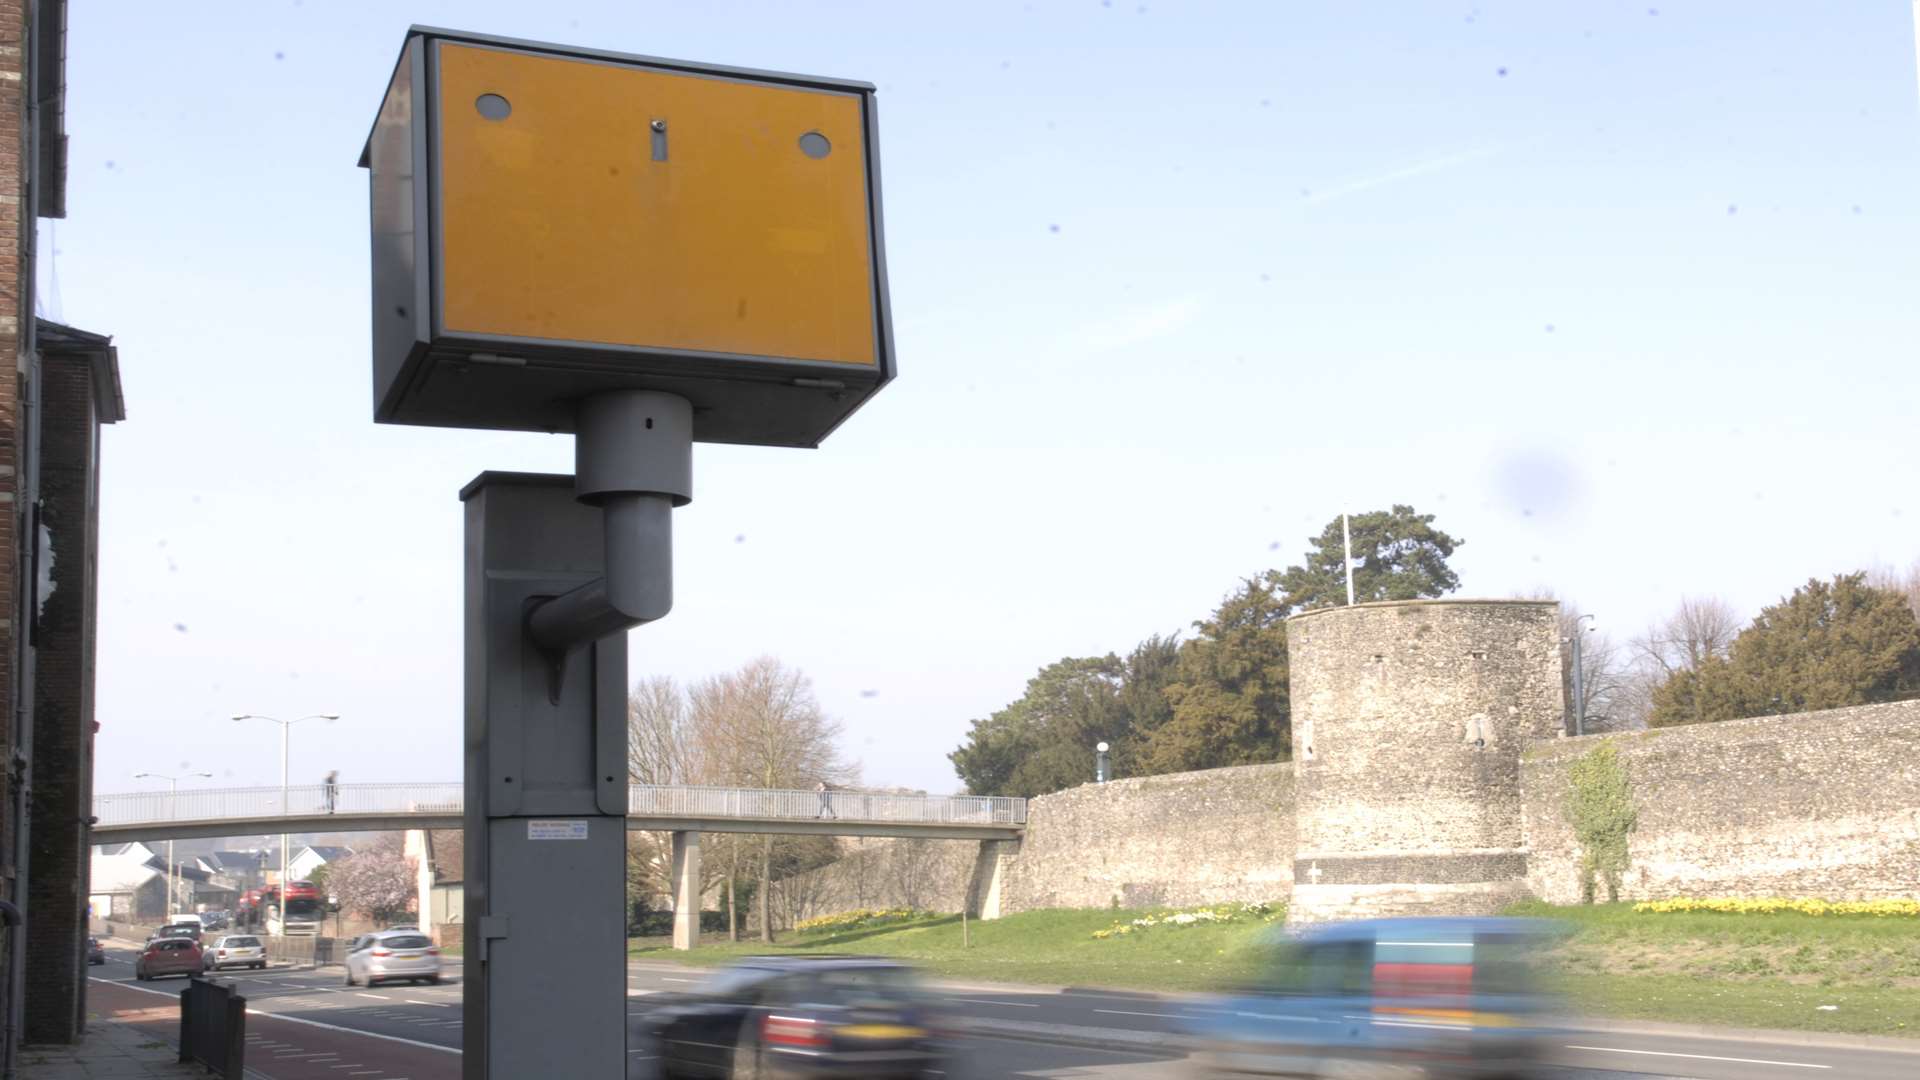 The speed camera at Pin Hill